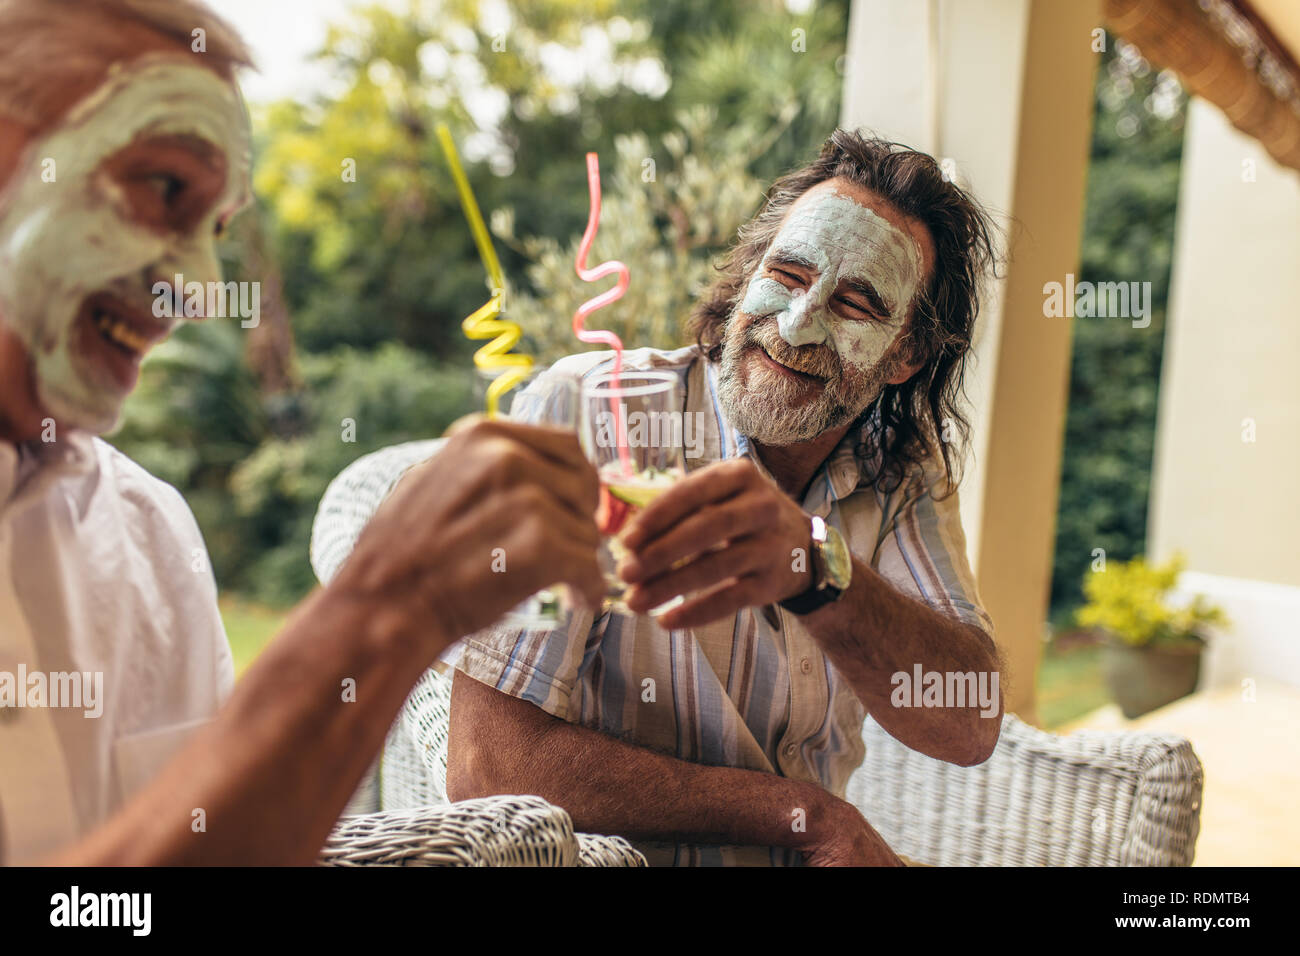 Happy old people toasting juice glasses with facial clay mask on. Funny senior men sitting together with face mask having juice. Stock Photo